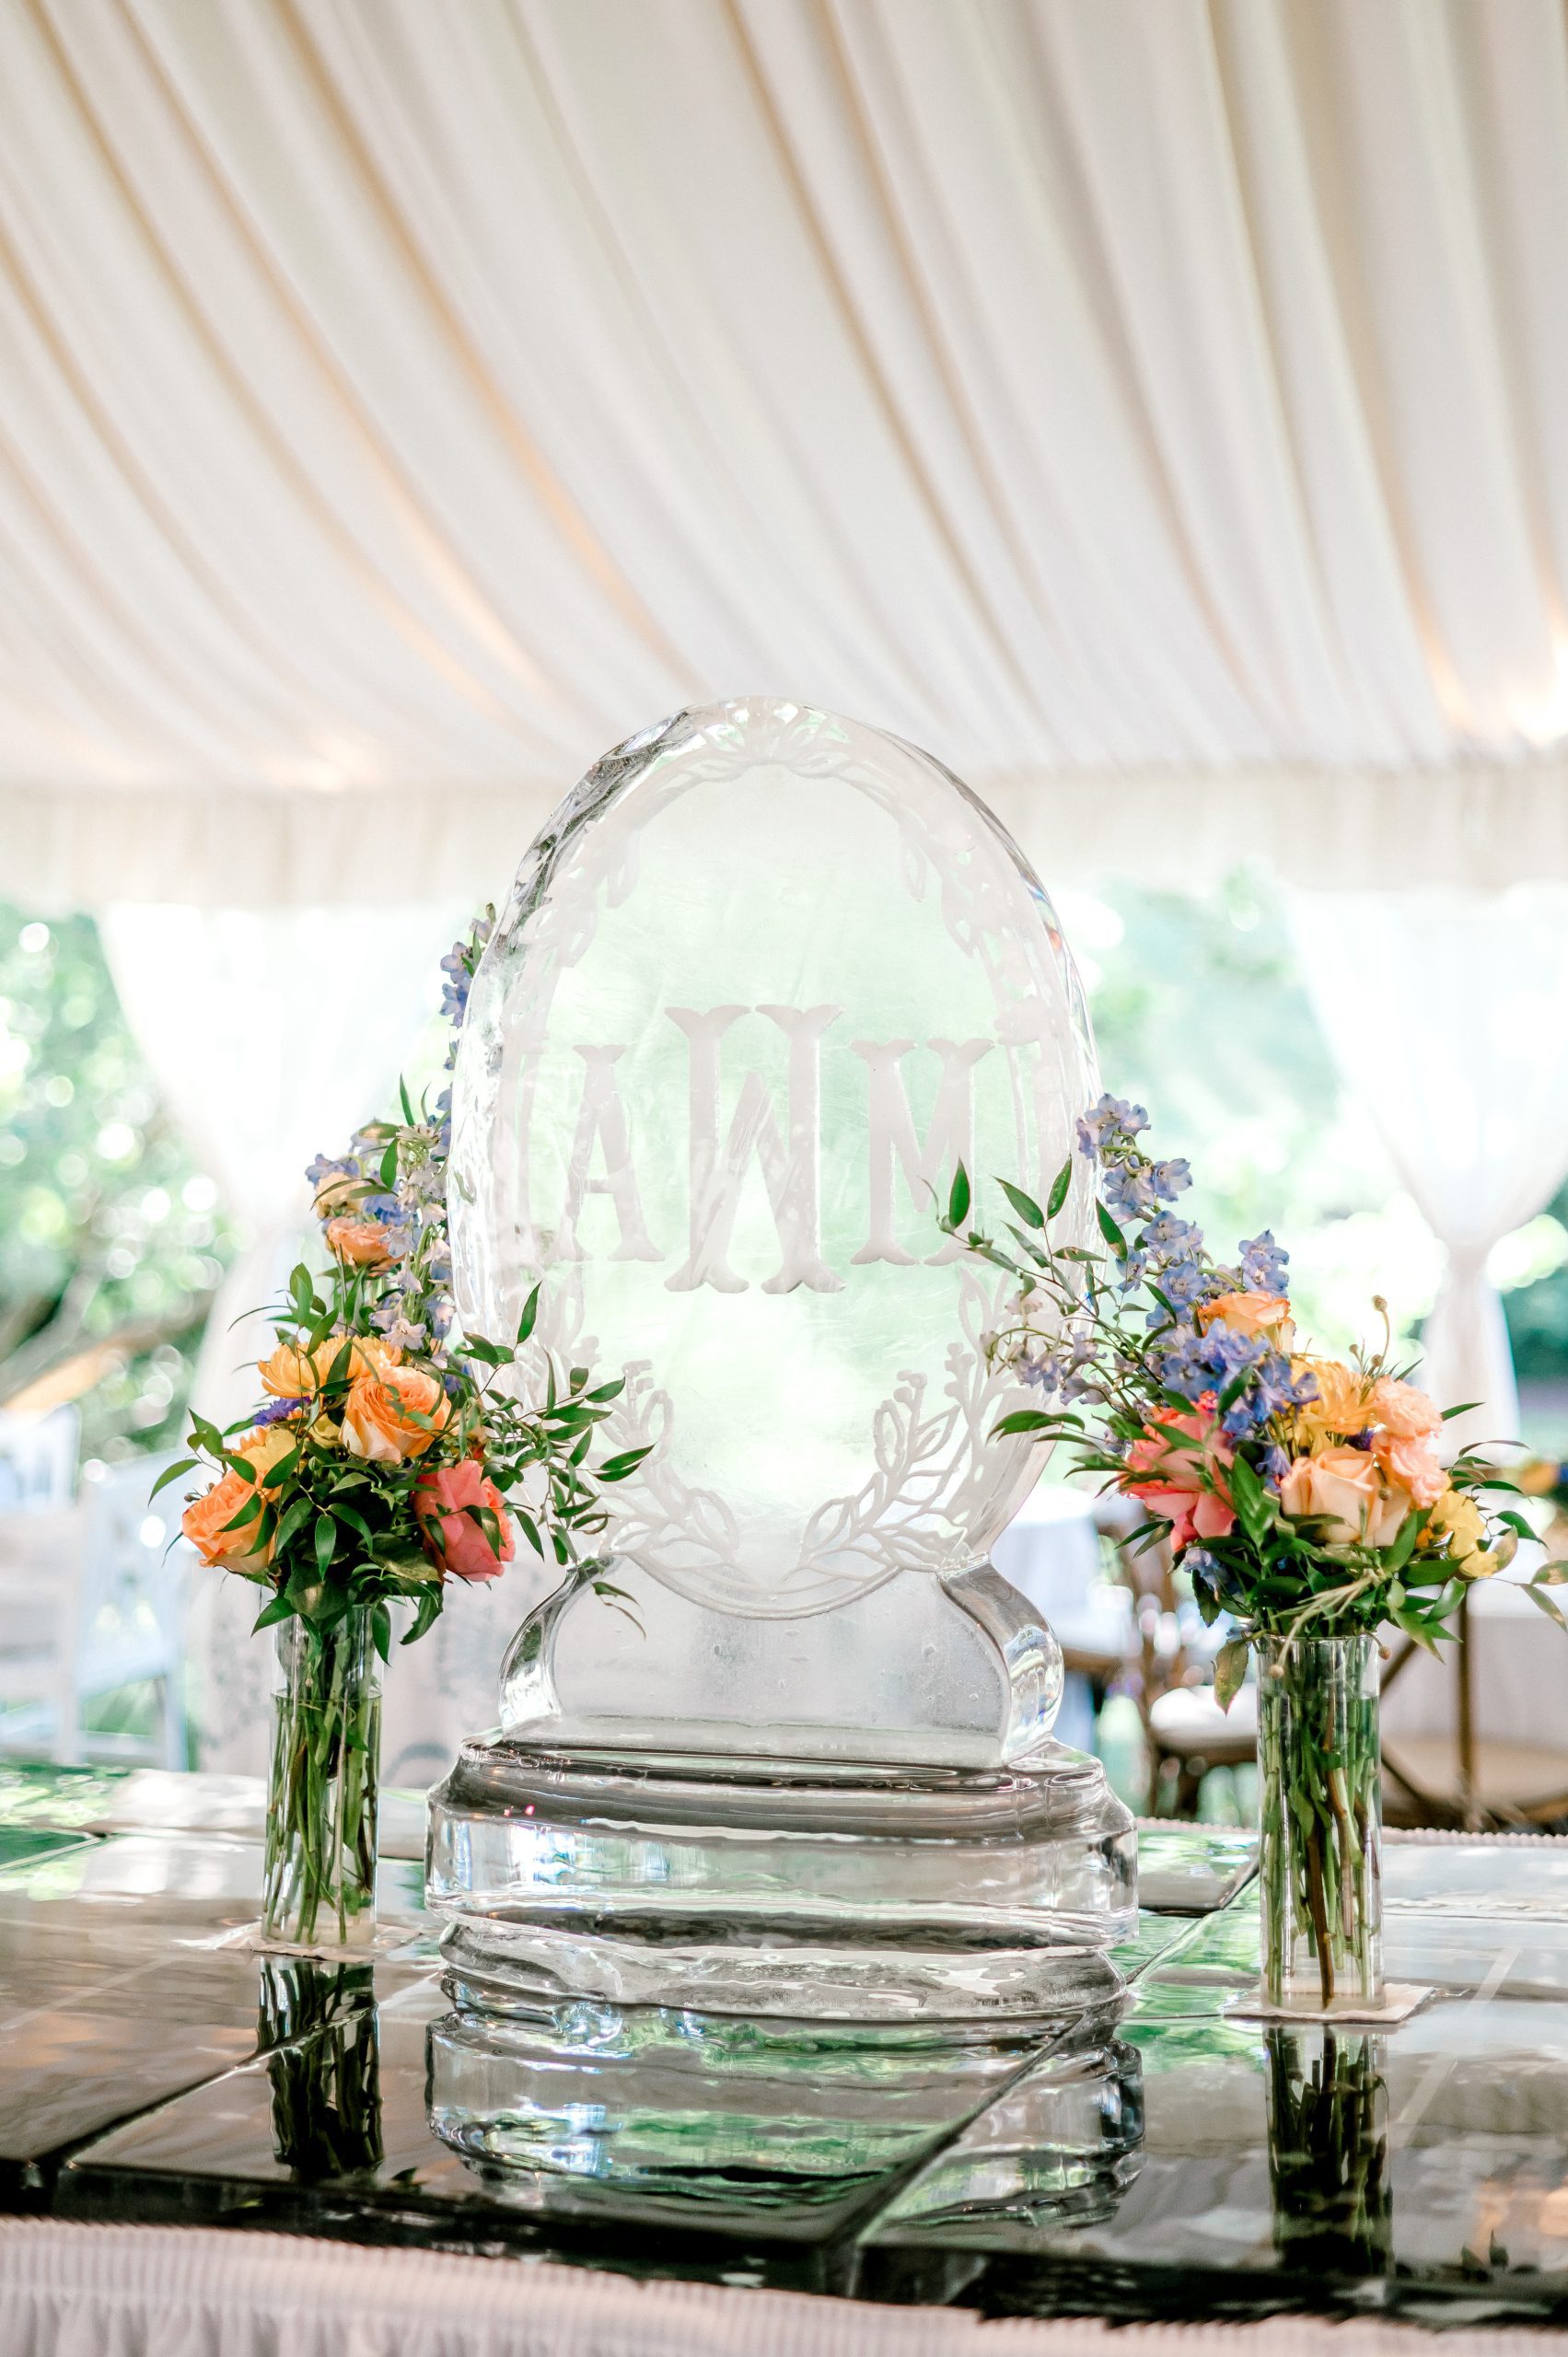 custom wedding monogram ice sculpture with floral accents